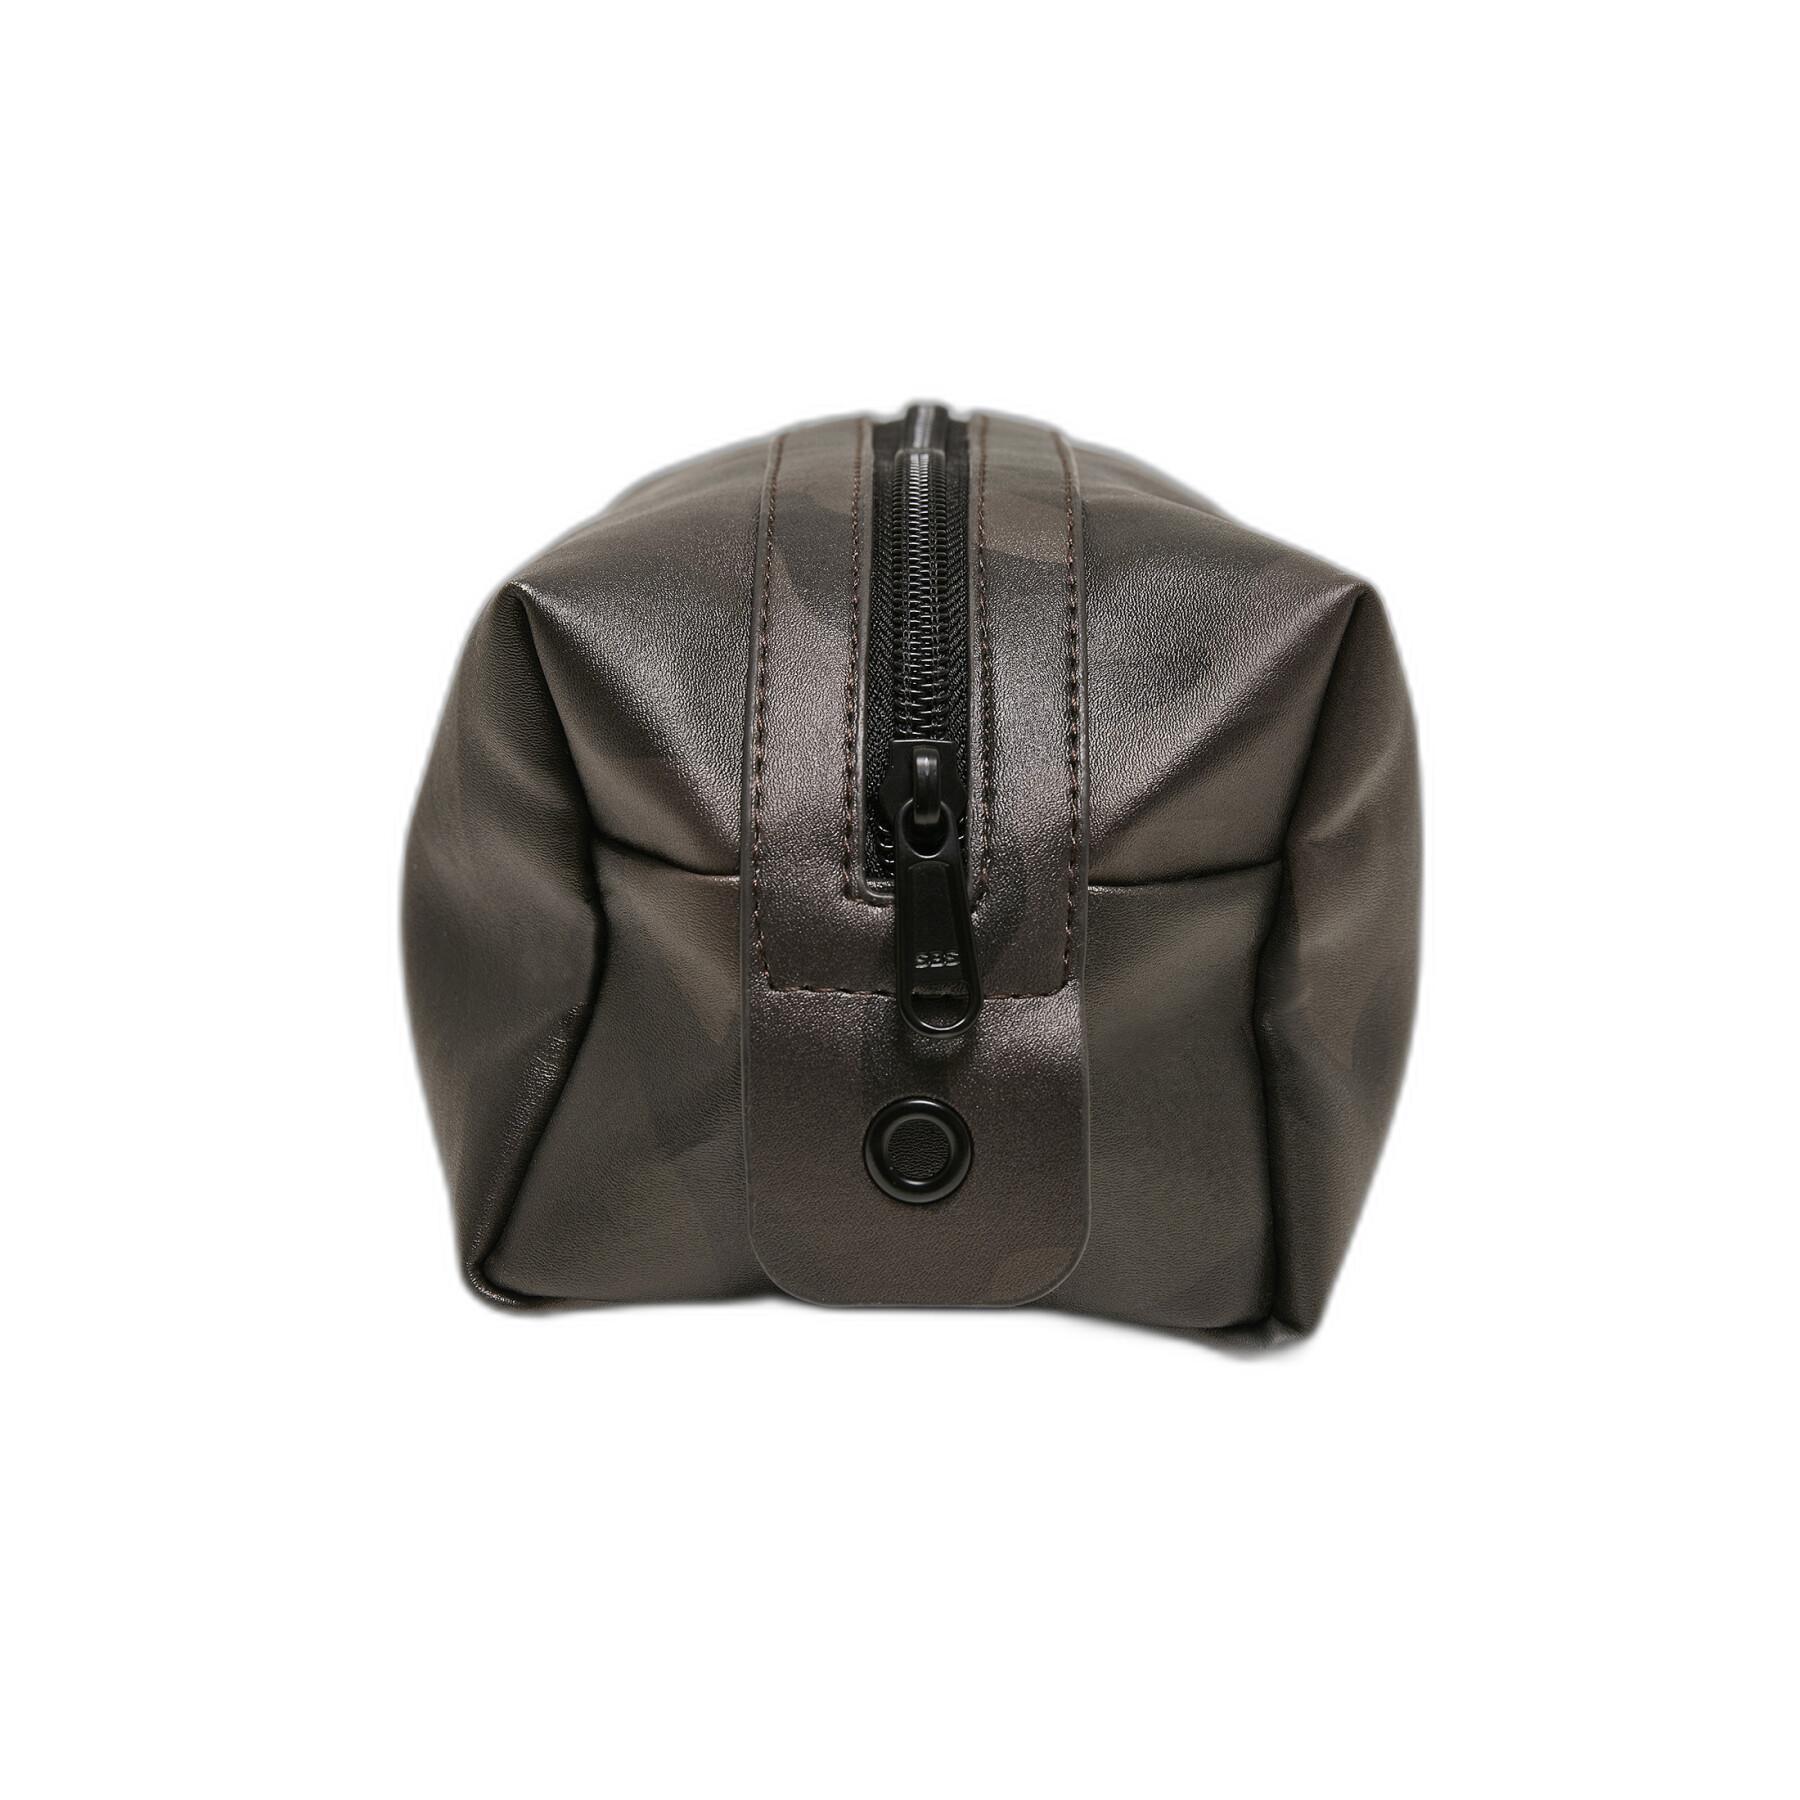 Synthetic leather cosmetic pouch Urban Classics